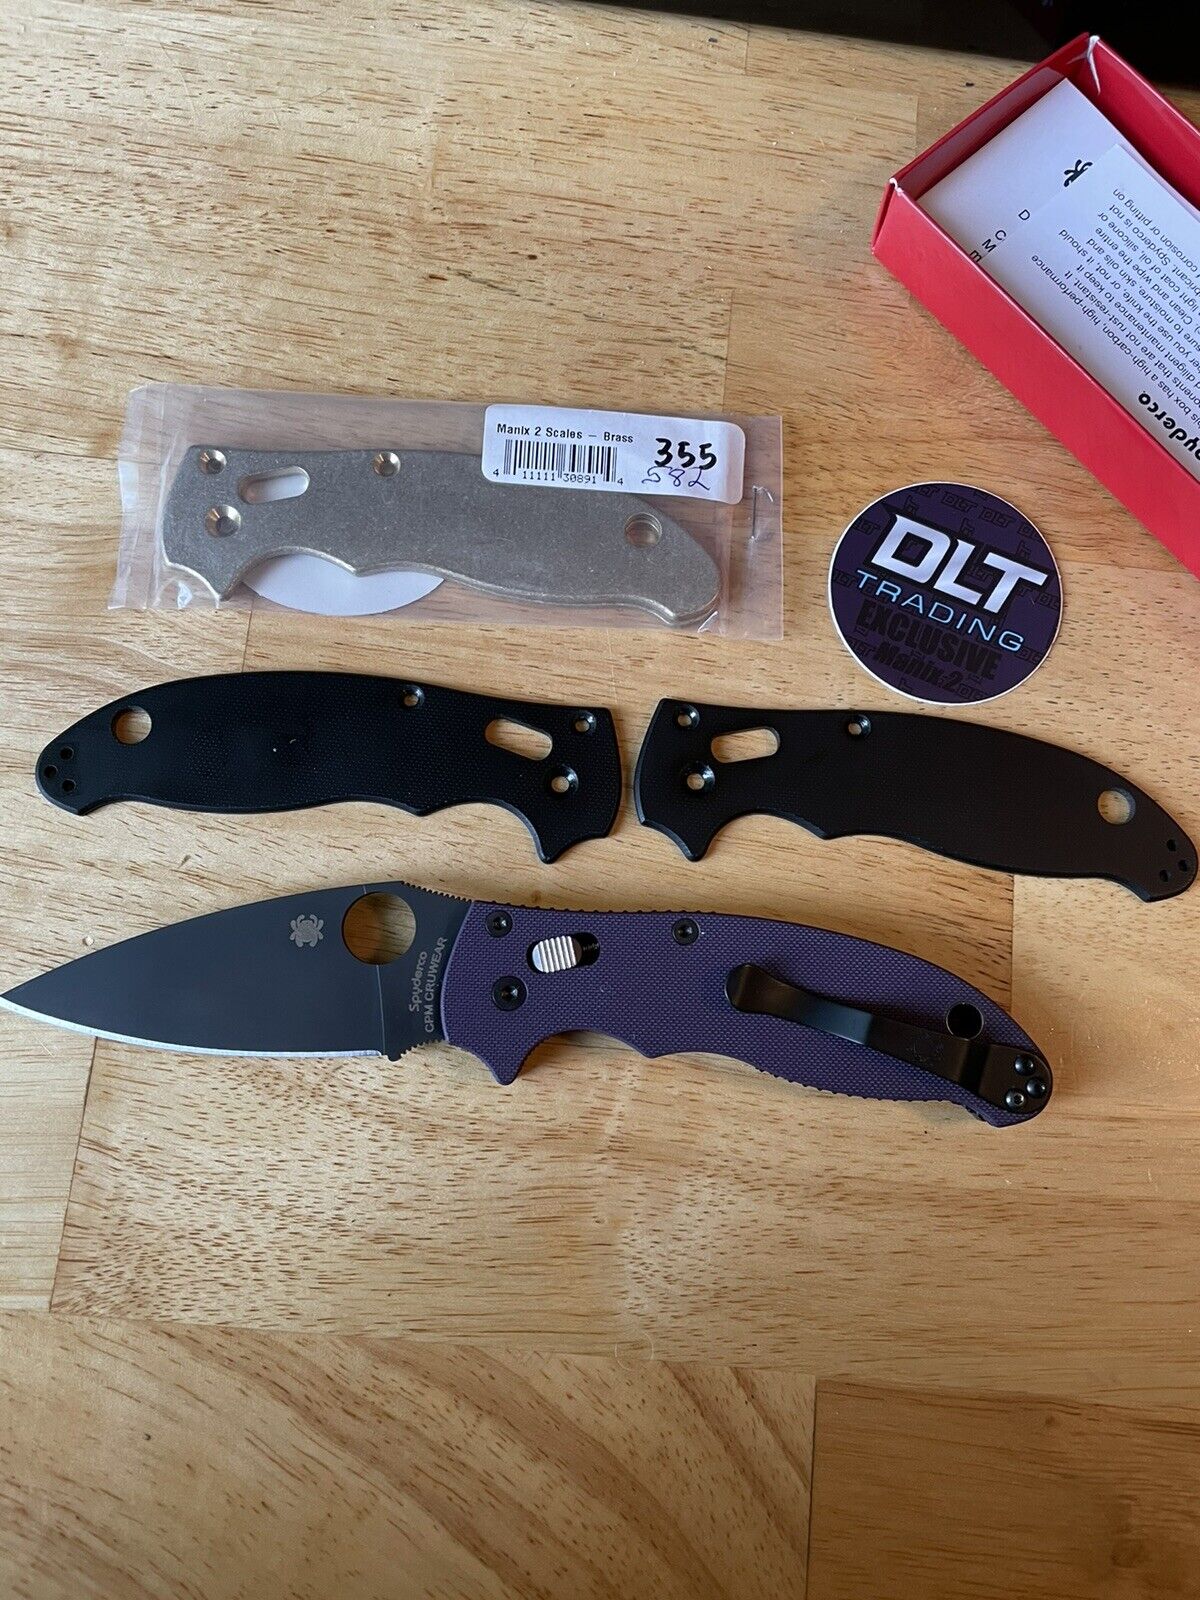 spyderco manix 2 cruwear DLT TRADING exclusive With Brass Scales And Smooth G10